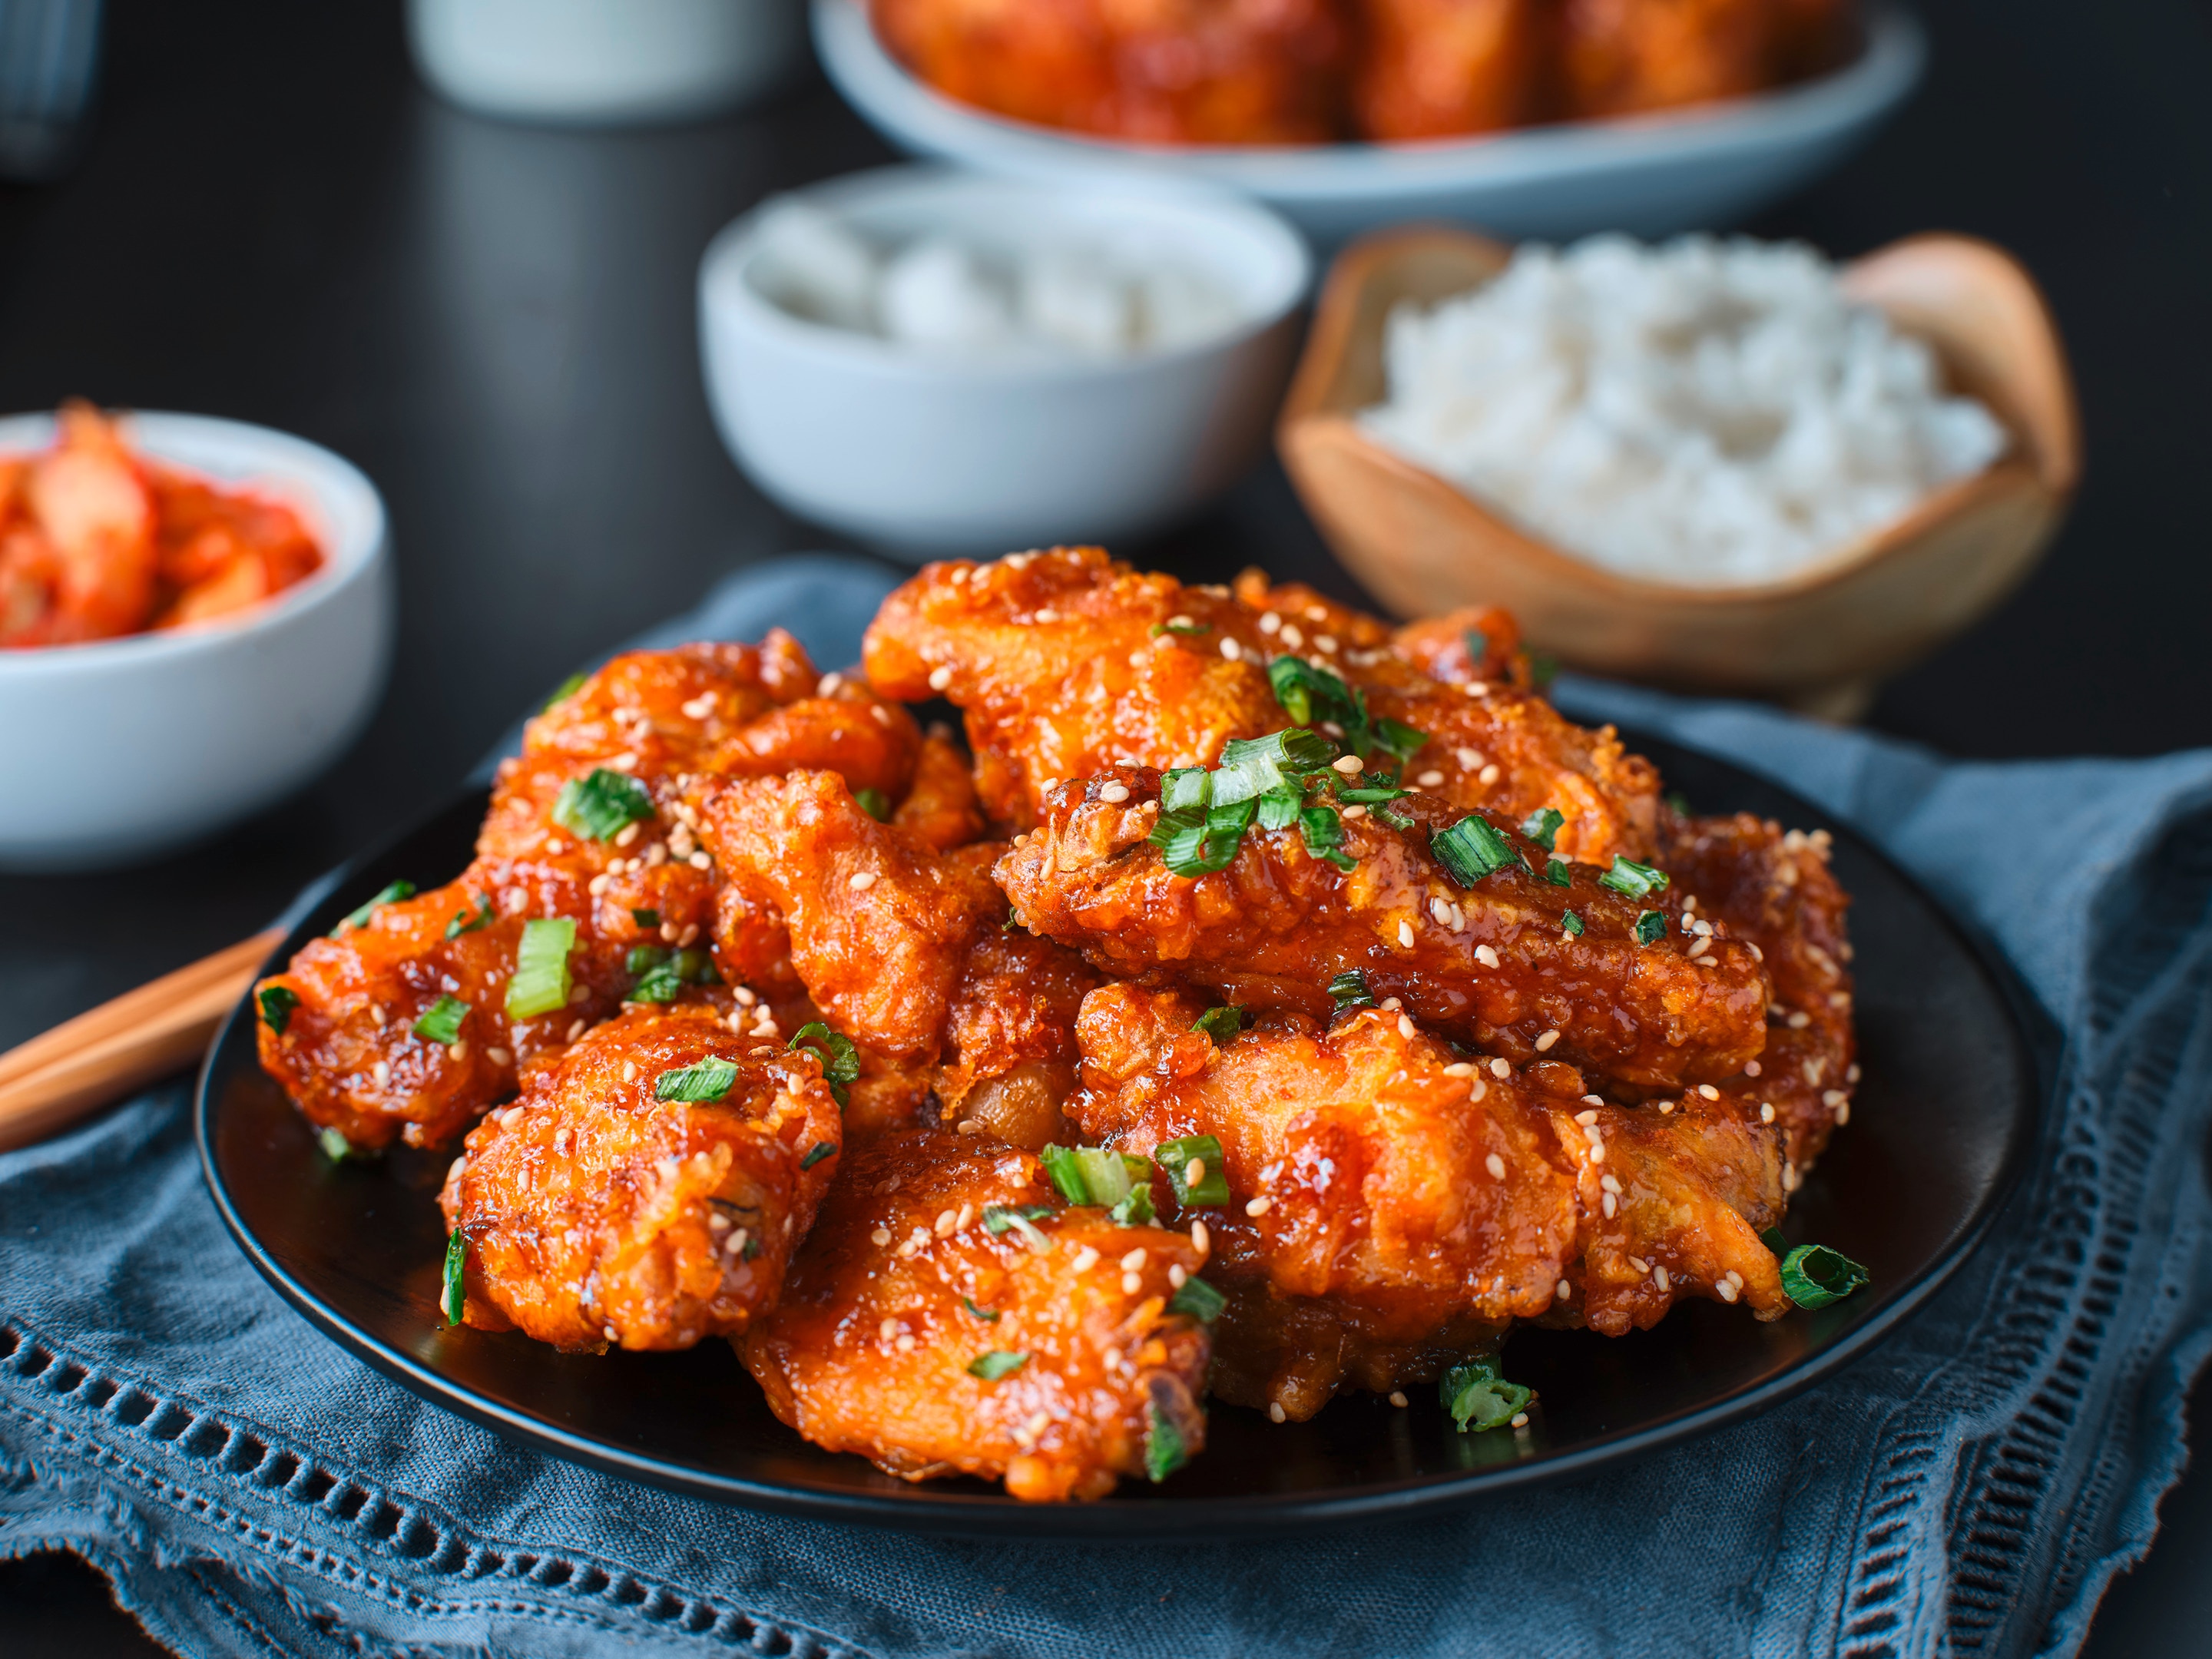 Korean fried chicken on a black plate garnished with sesame seeds and spring onion